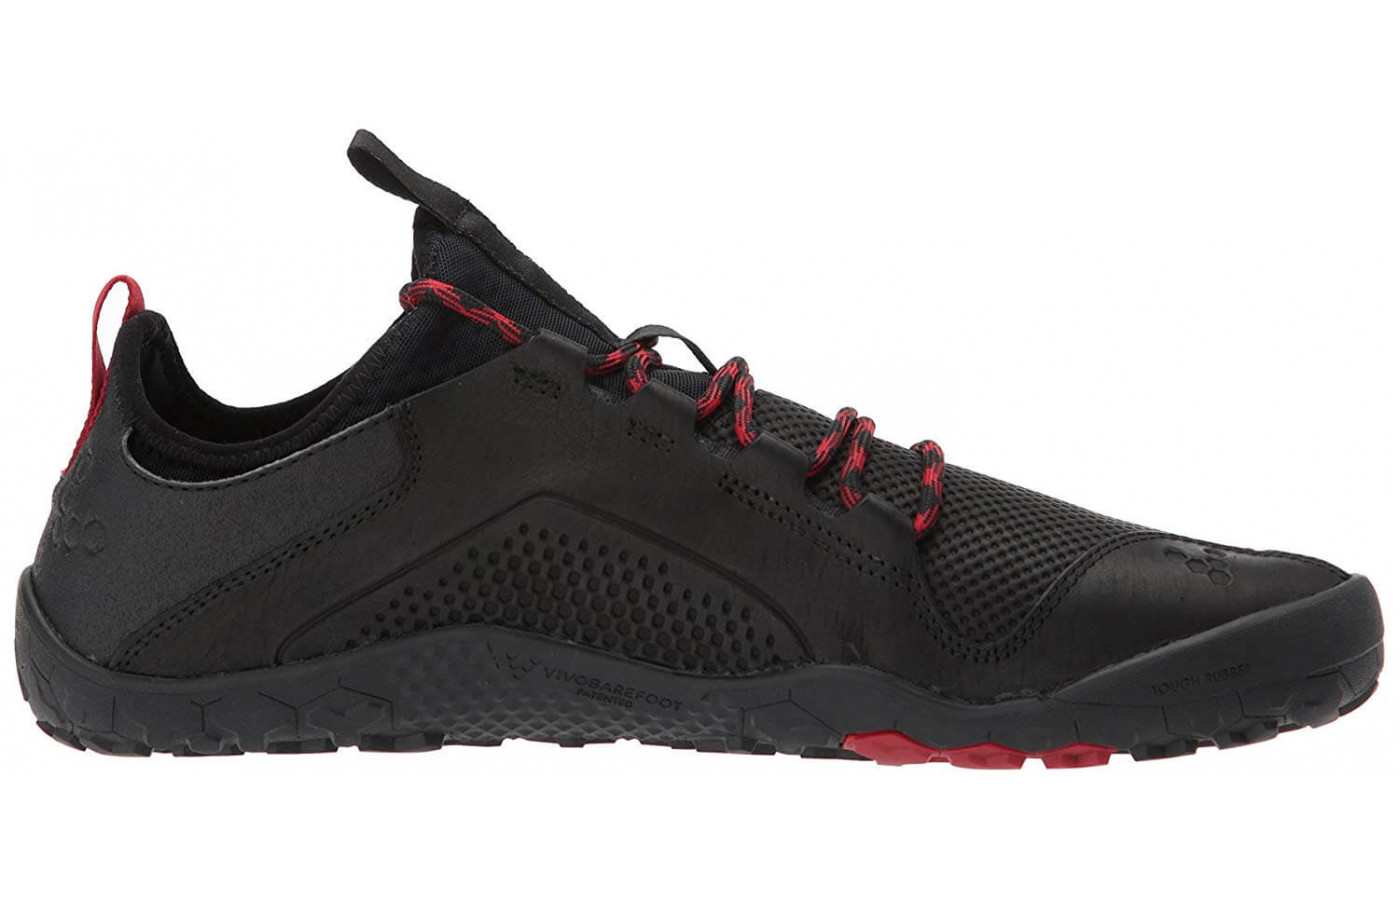 A leather upper gives the Primus Trek a water-resistant wear